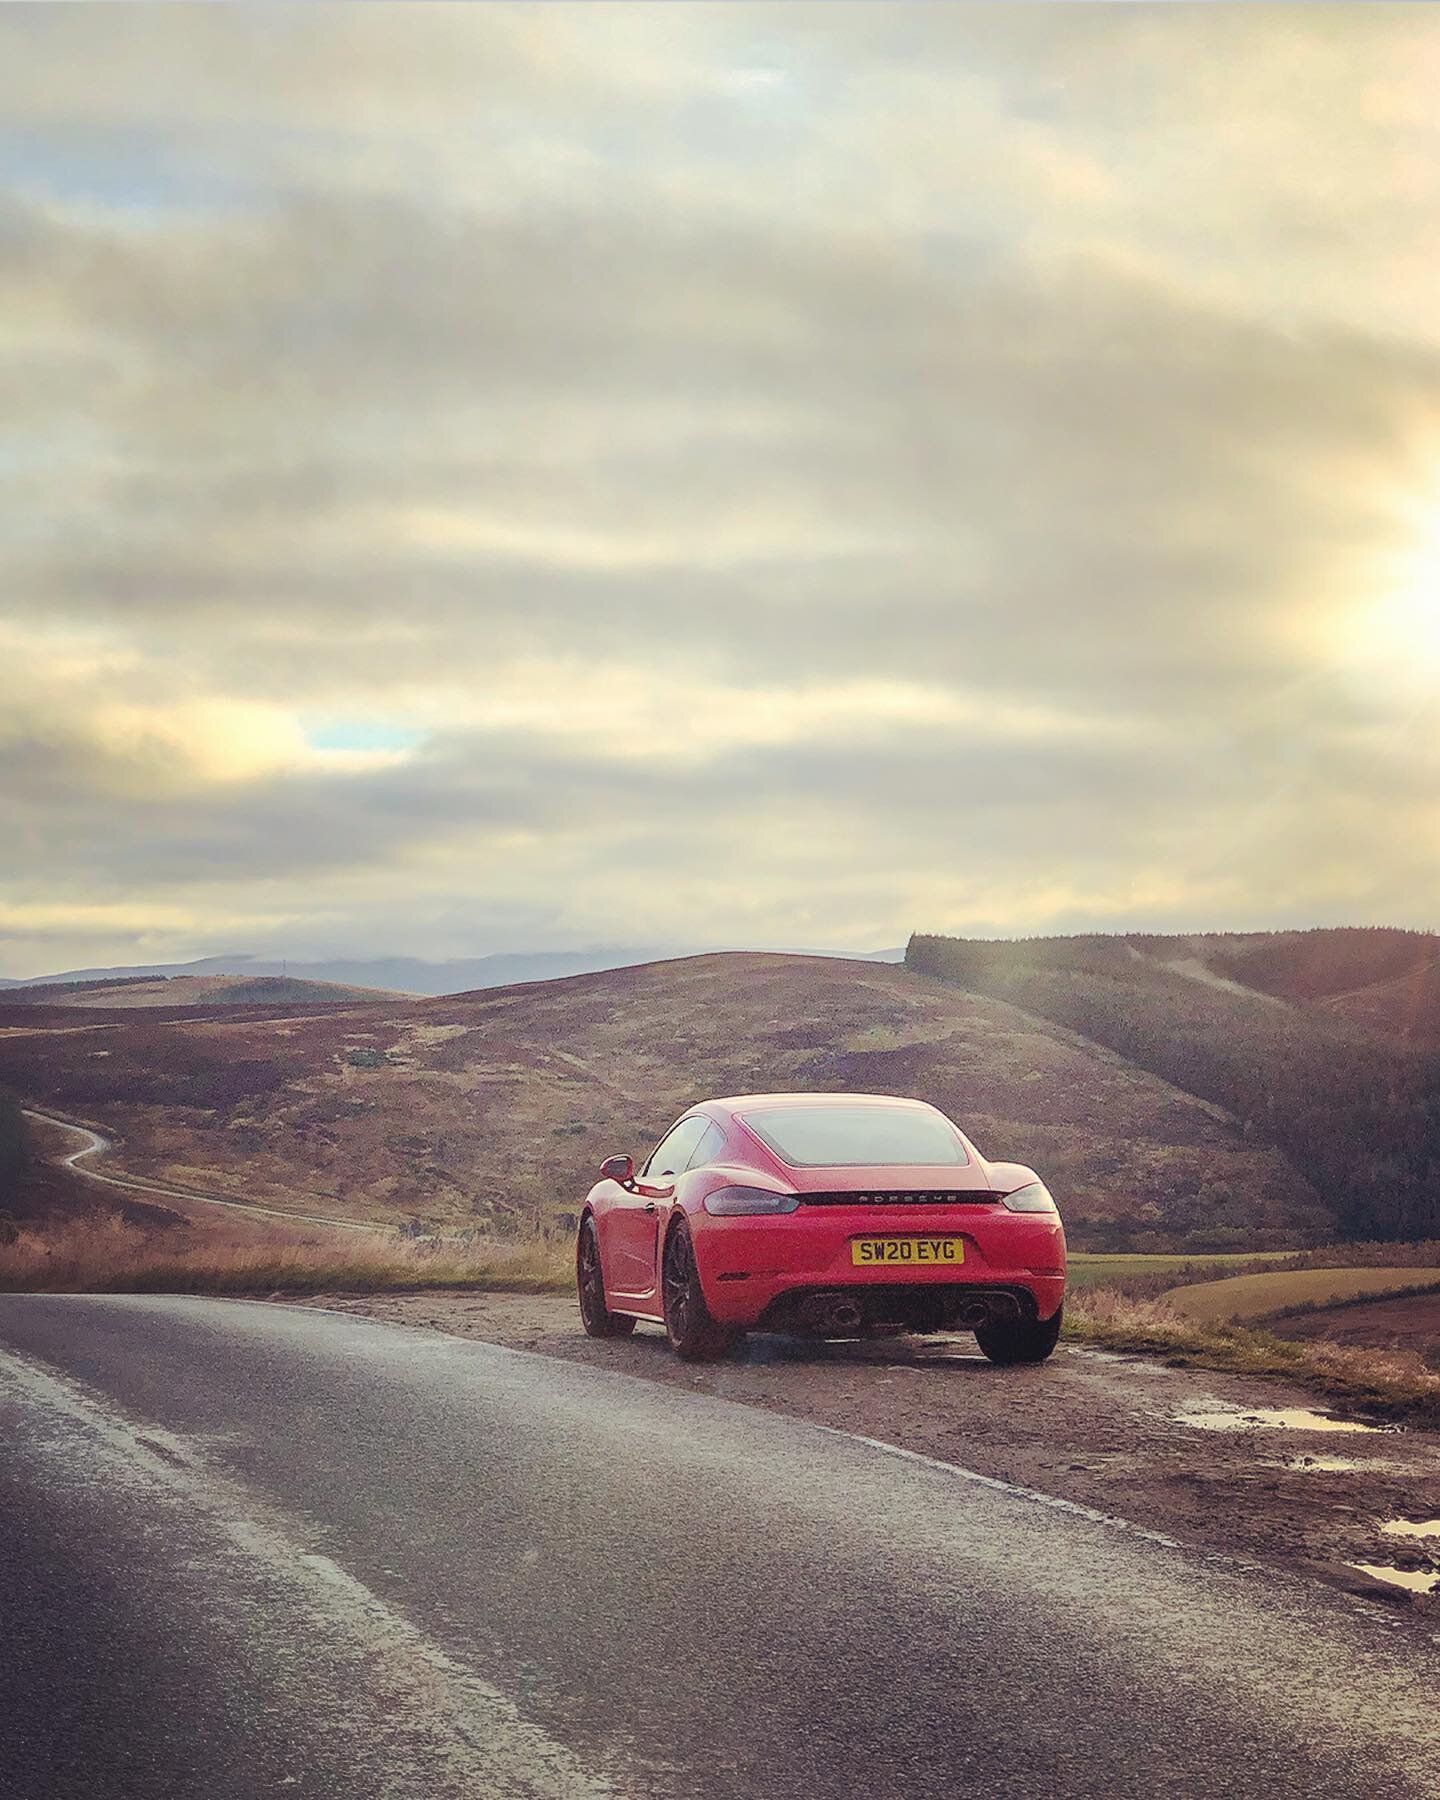 8:00 am Sunday run in the Cairngorms today on a banging stretch of road near Tomintoul. Close to 3000 miles now on the gts 4.0 and i love this new engine. #flat6 #porsche #cairngorms #oldmilitaryroad #caymangts